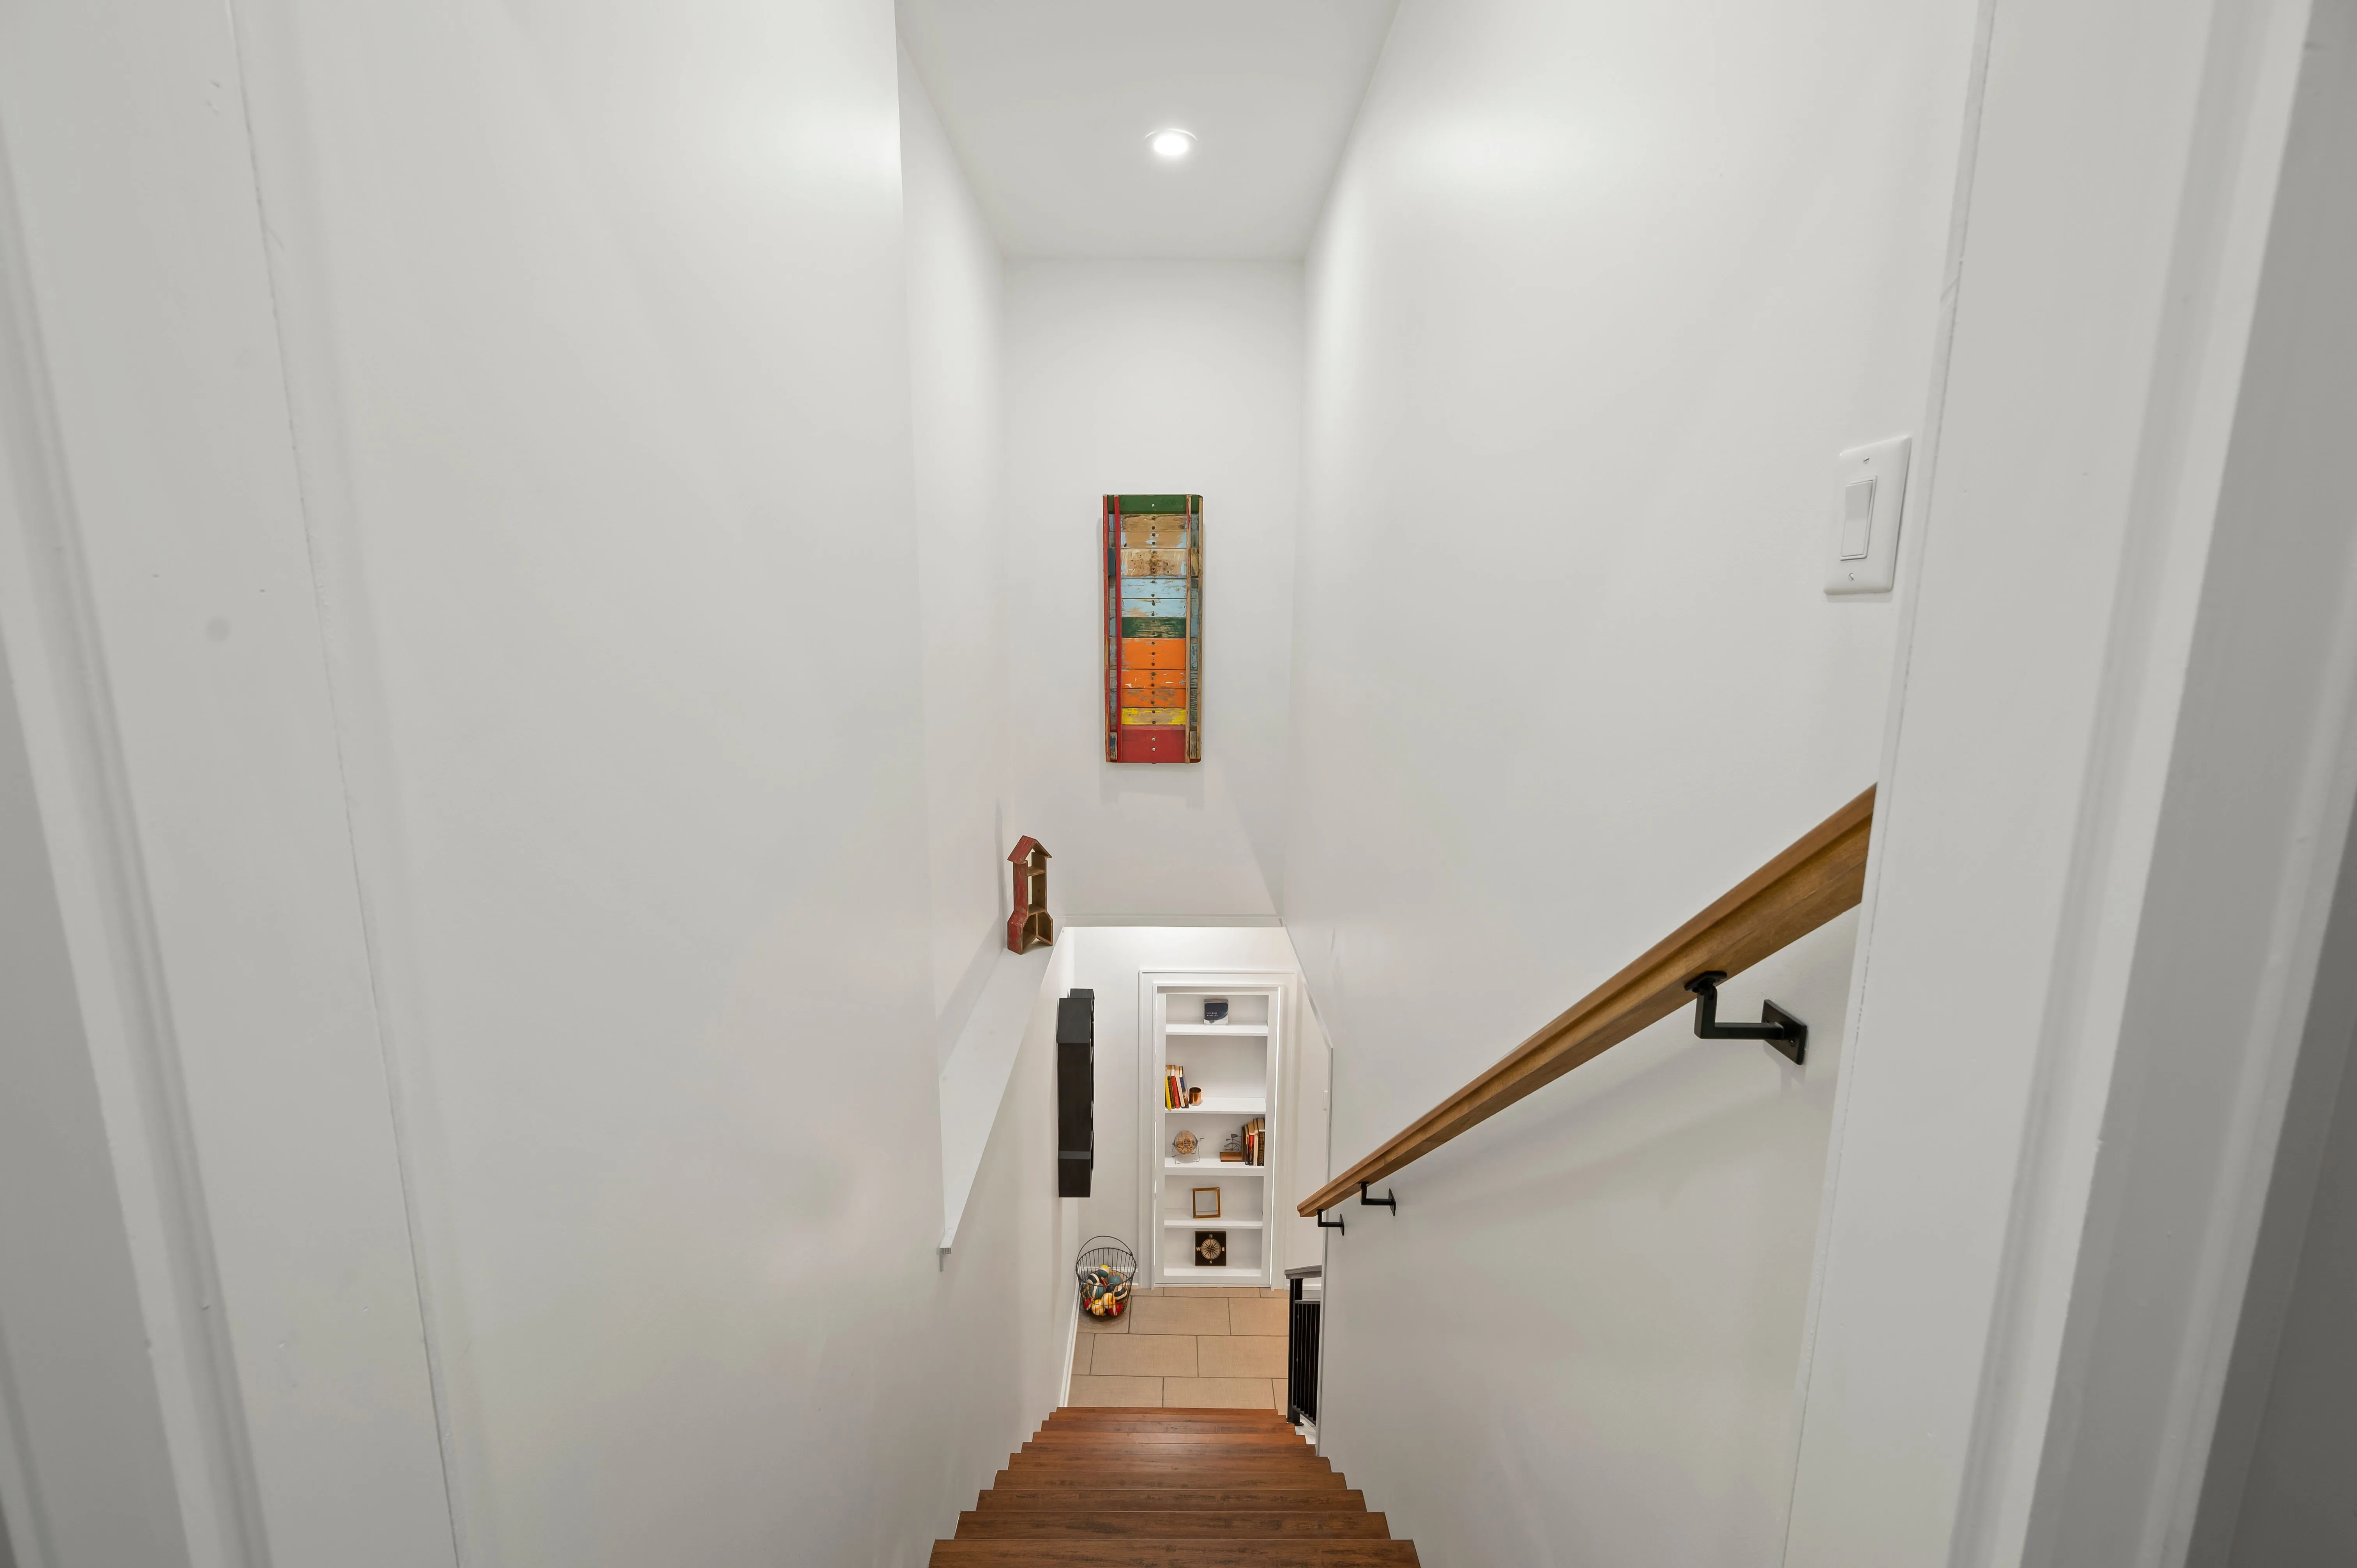 Narrow staircase with white walls, wooden steps, and a handrail leading down to a door.